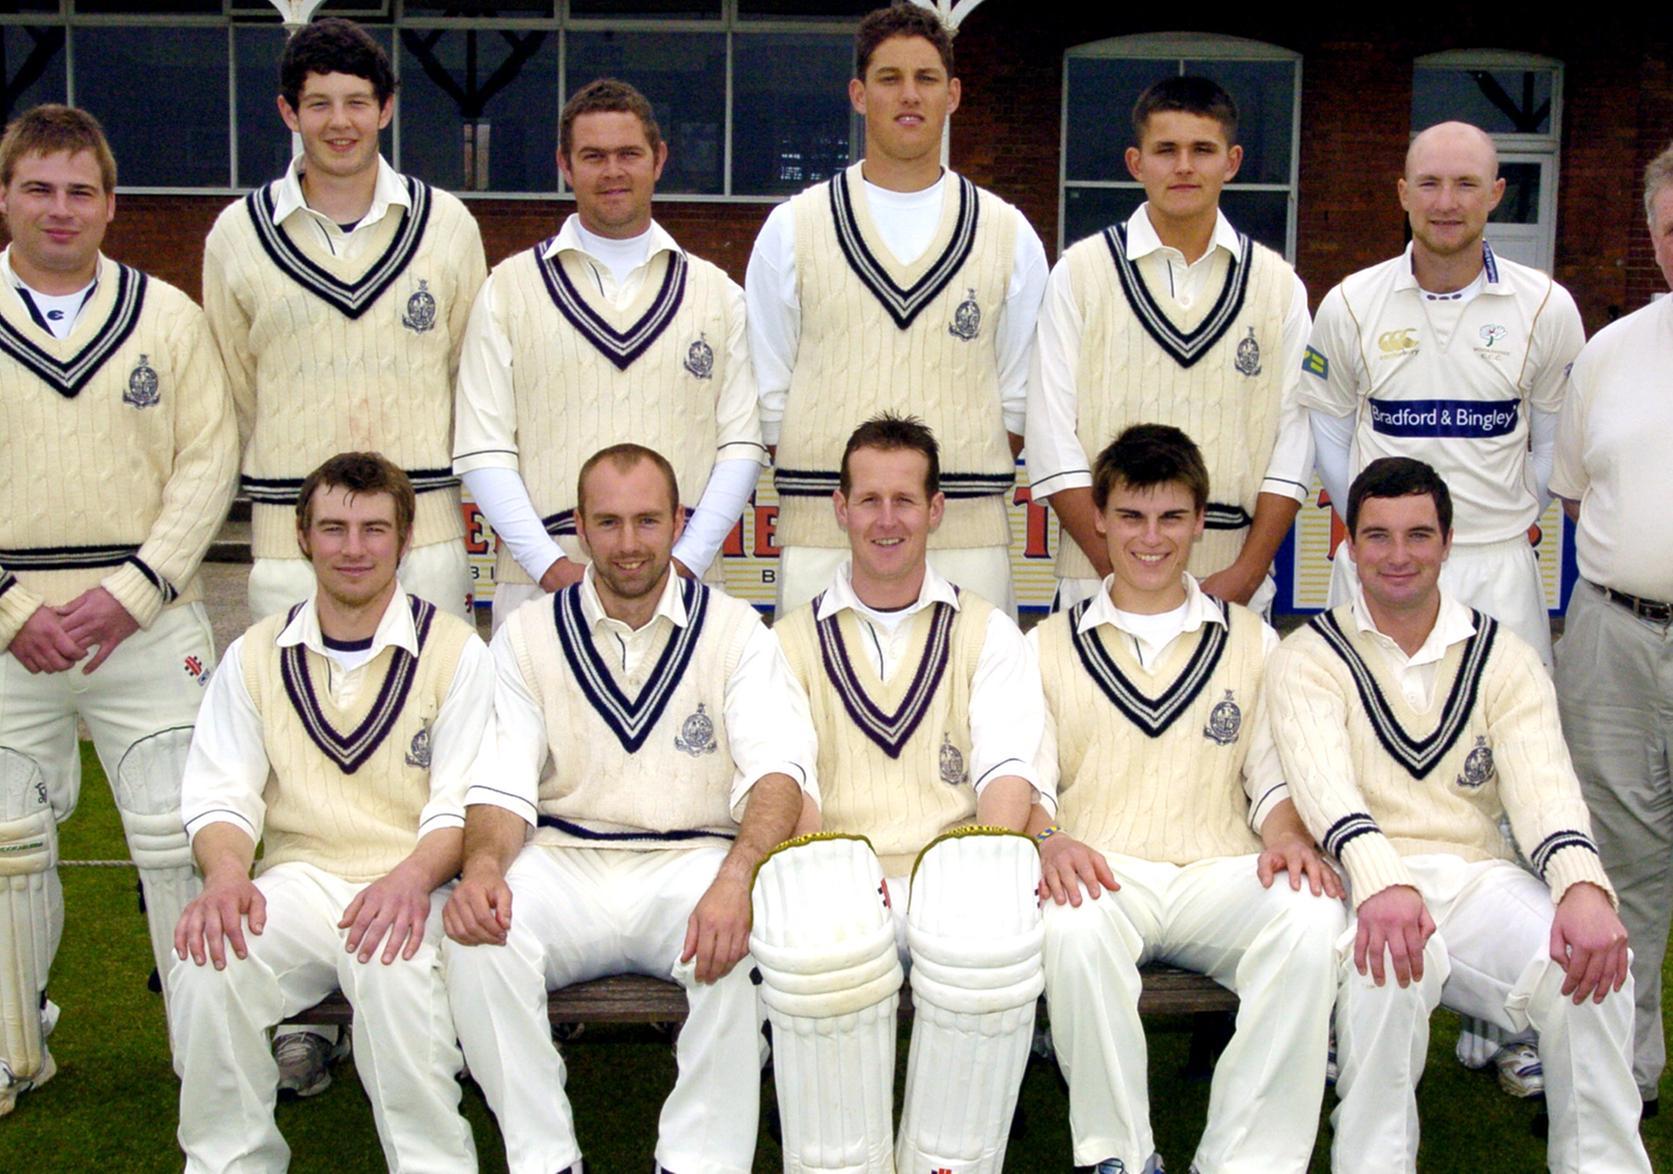 Do you recognise anyone in these pictures? Tweet @SN_Sport or email Daniel.gregory@jpimedia.co.uk